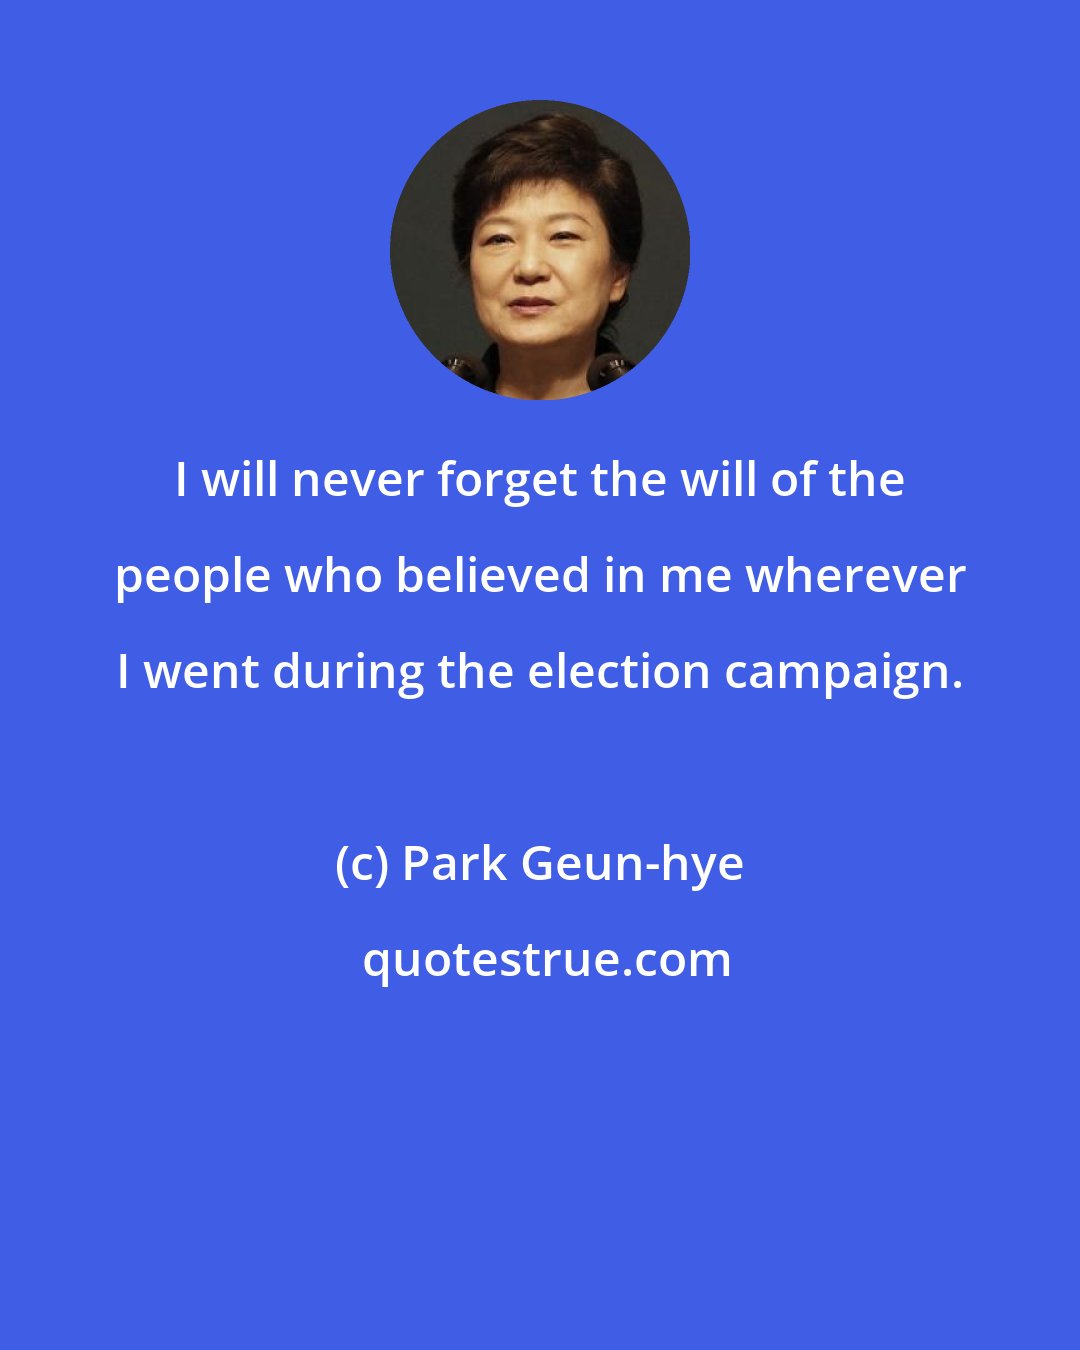 Park Geun-hye: I will never forget the will of the people who believed in me wherever I went during the election campaign.